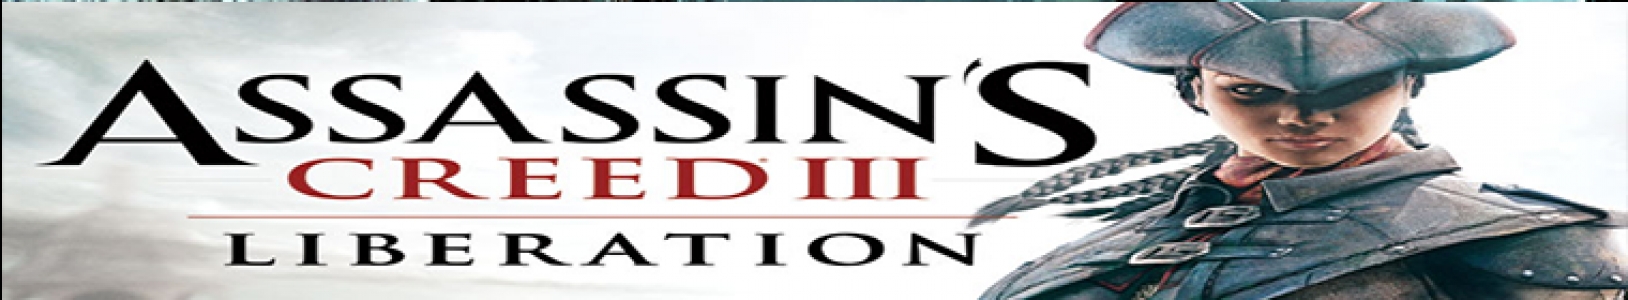 Assassin's Creed Liberation HD banner